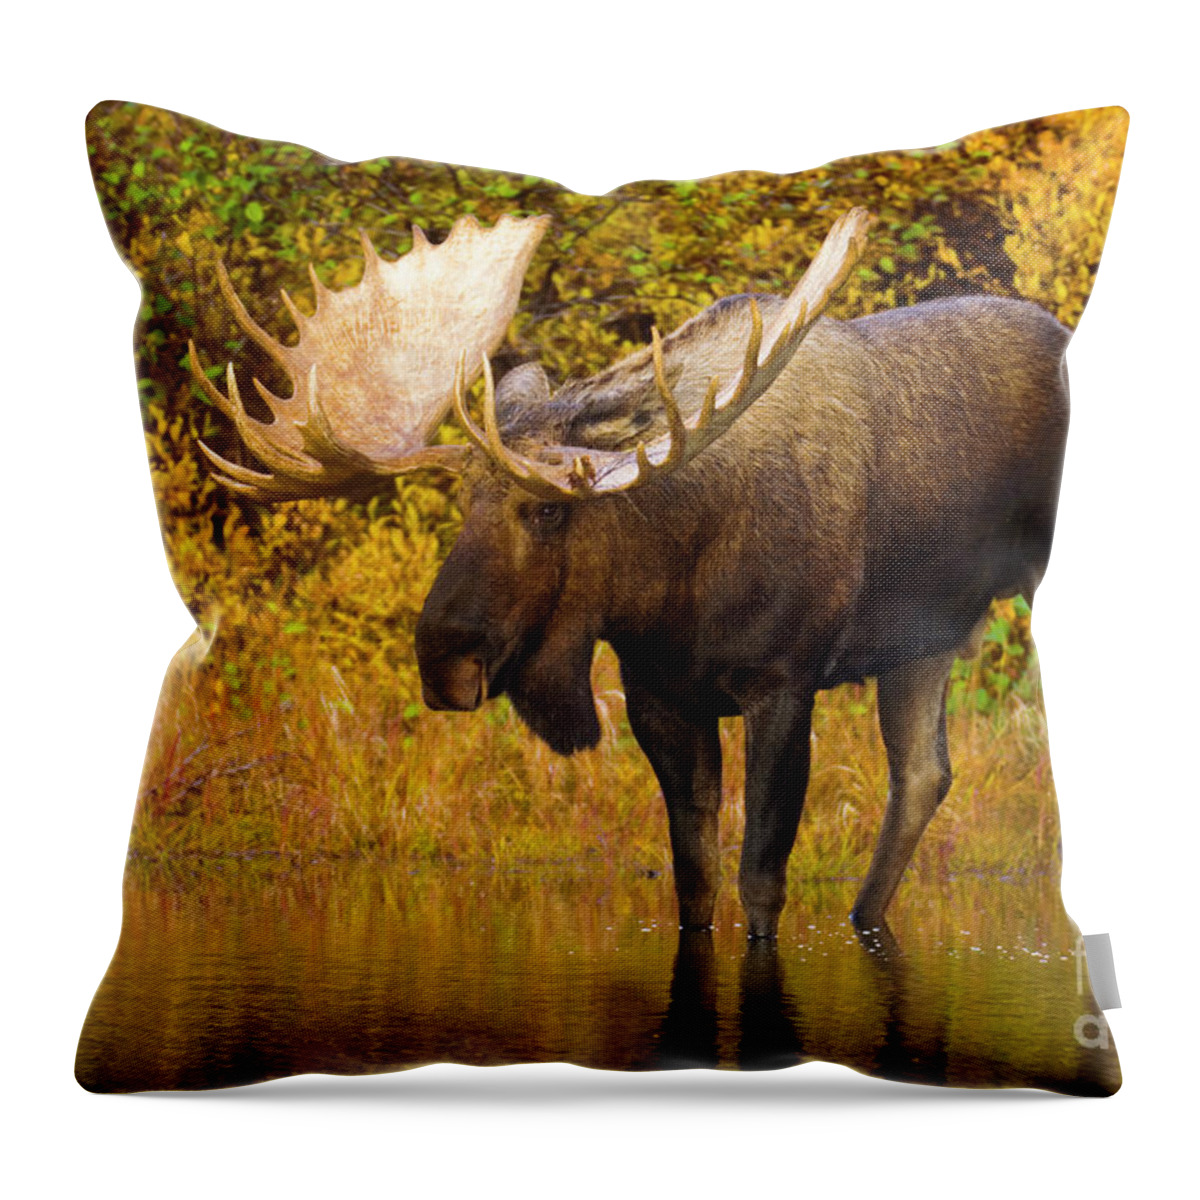 00345399 Throw Pillow featuring the photograph Moose In Glacial Kettle Pond by Yva Momatiuk John Eastcott